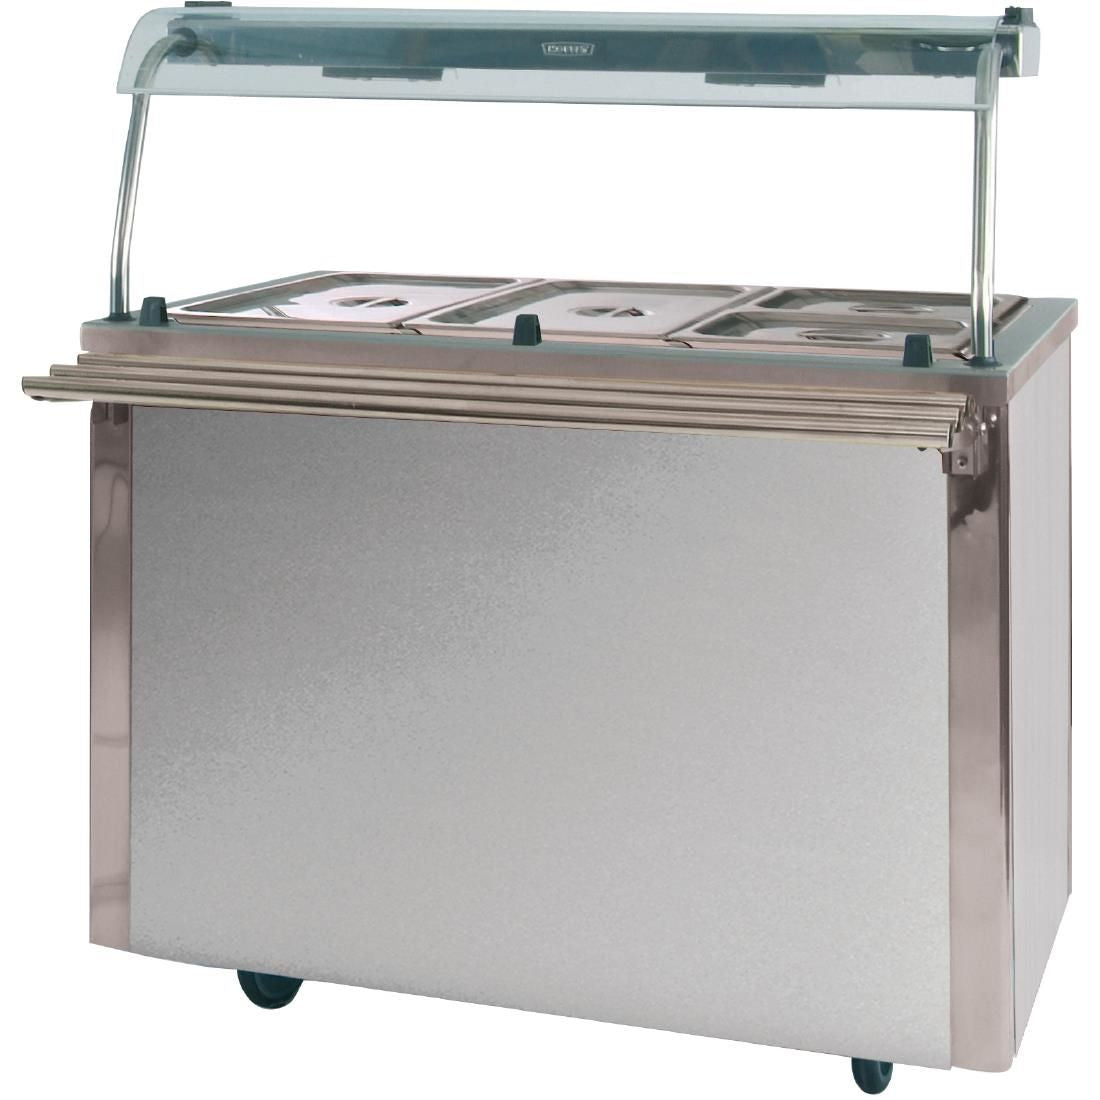 DR408 Moffat Versicarte Plus Hot Food Service Counter With Bain Marie VCBM3 JD Catering Equipment Solutions Ltd